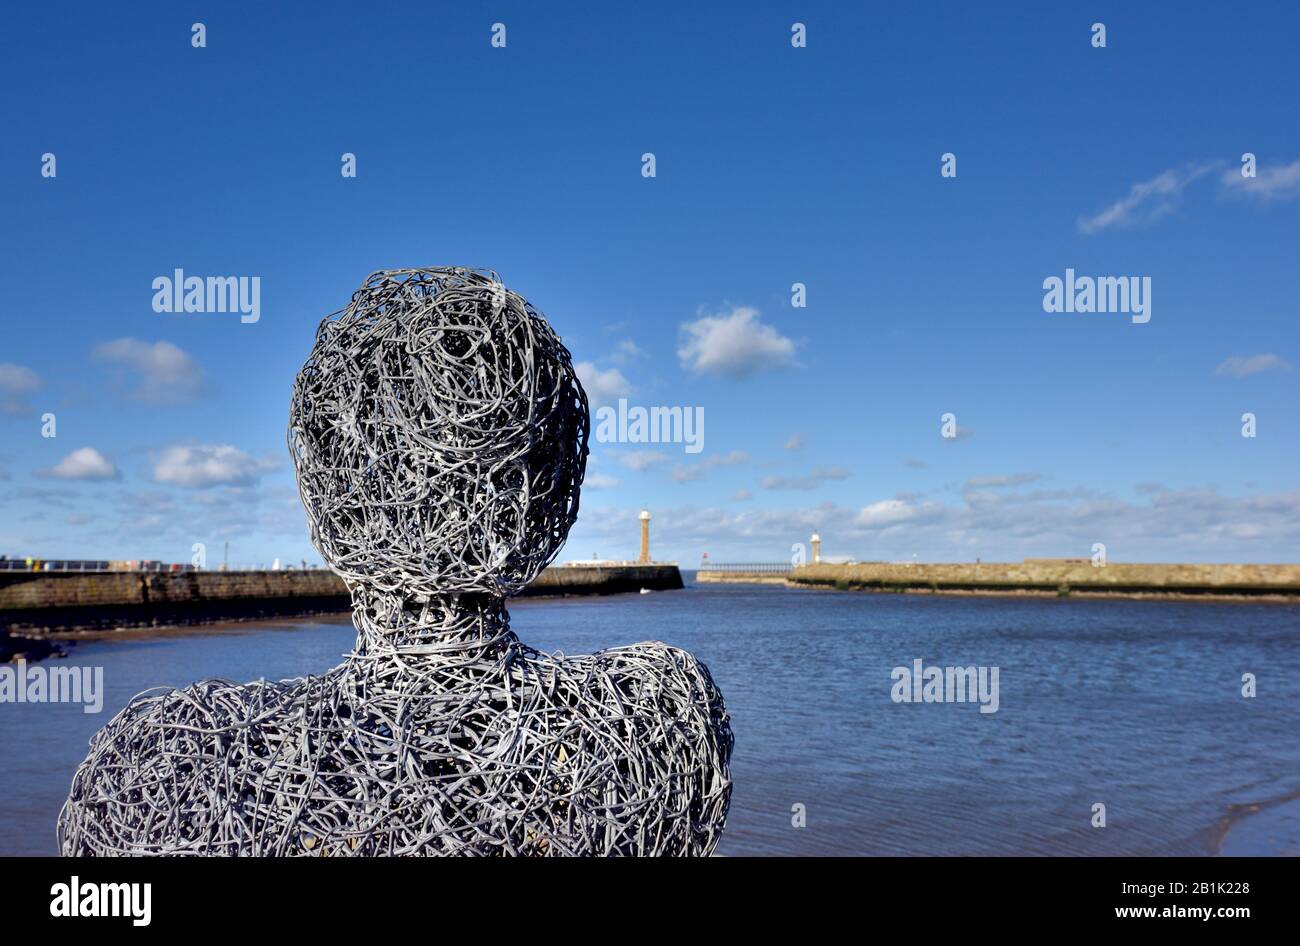 A whitby fisherlass sculpture,a tribute to the towns fishing families,Tate hill pier,Whitby,North Yorkshire,England,UK Stock Photo